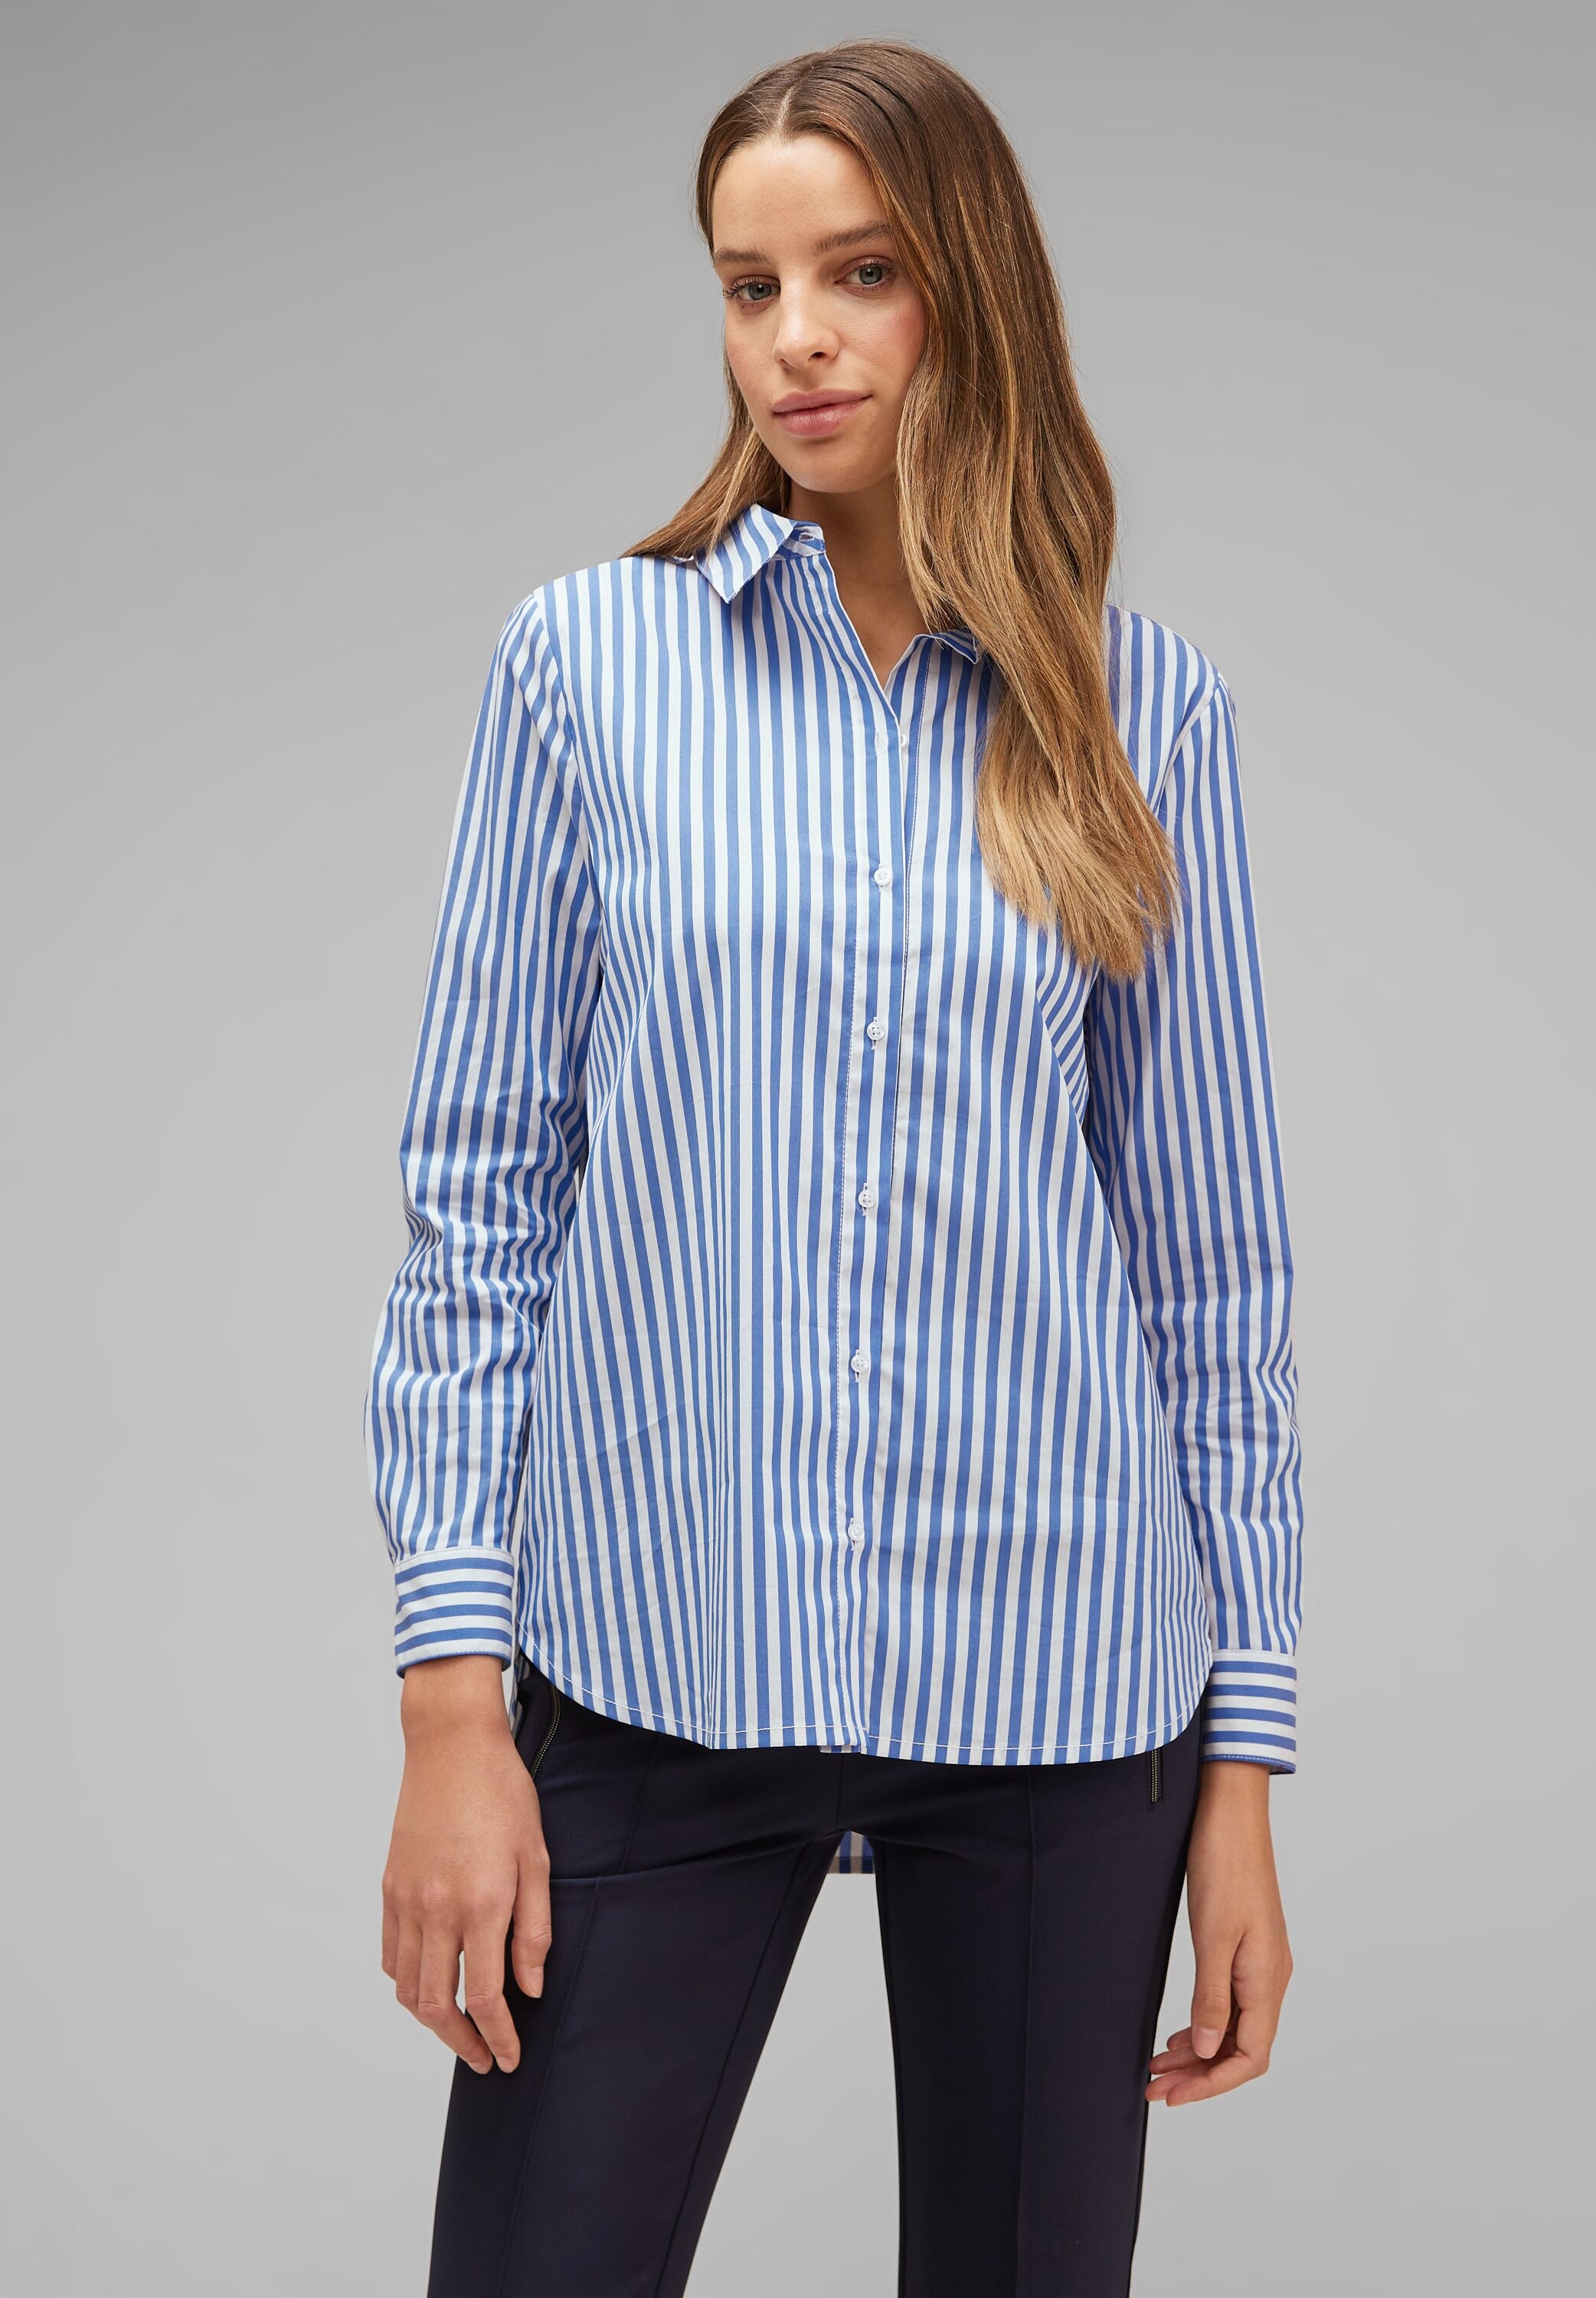 STREET ONE Longbluse »Striped Office bei mit Blouse«, Streifenmuster ♕